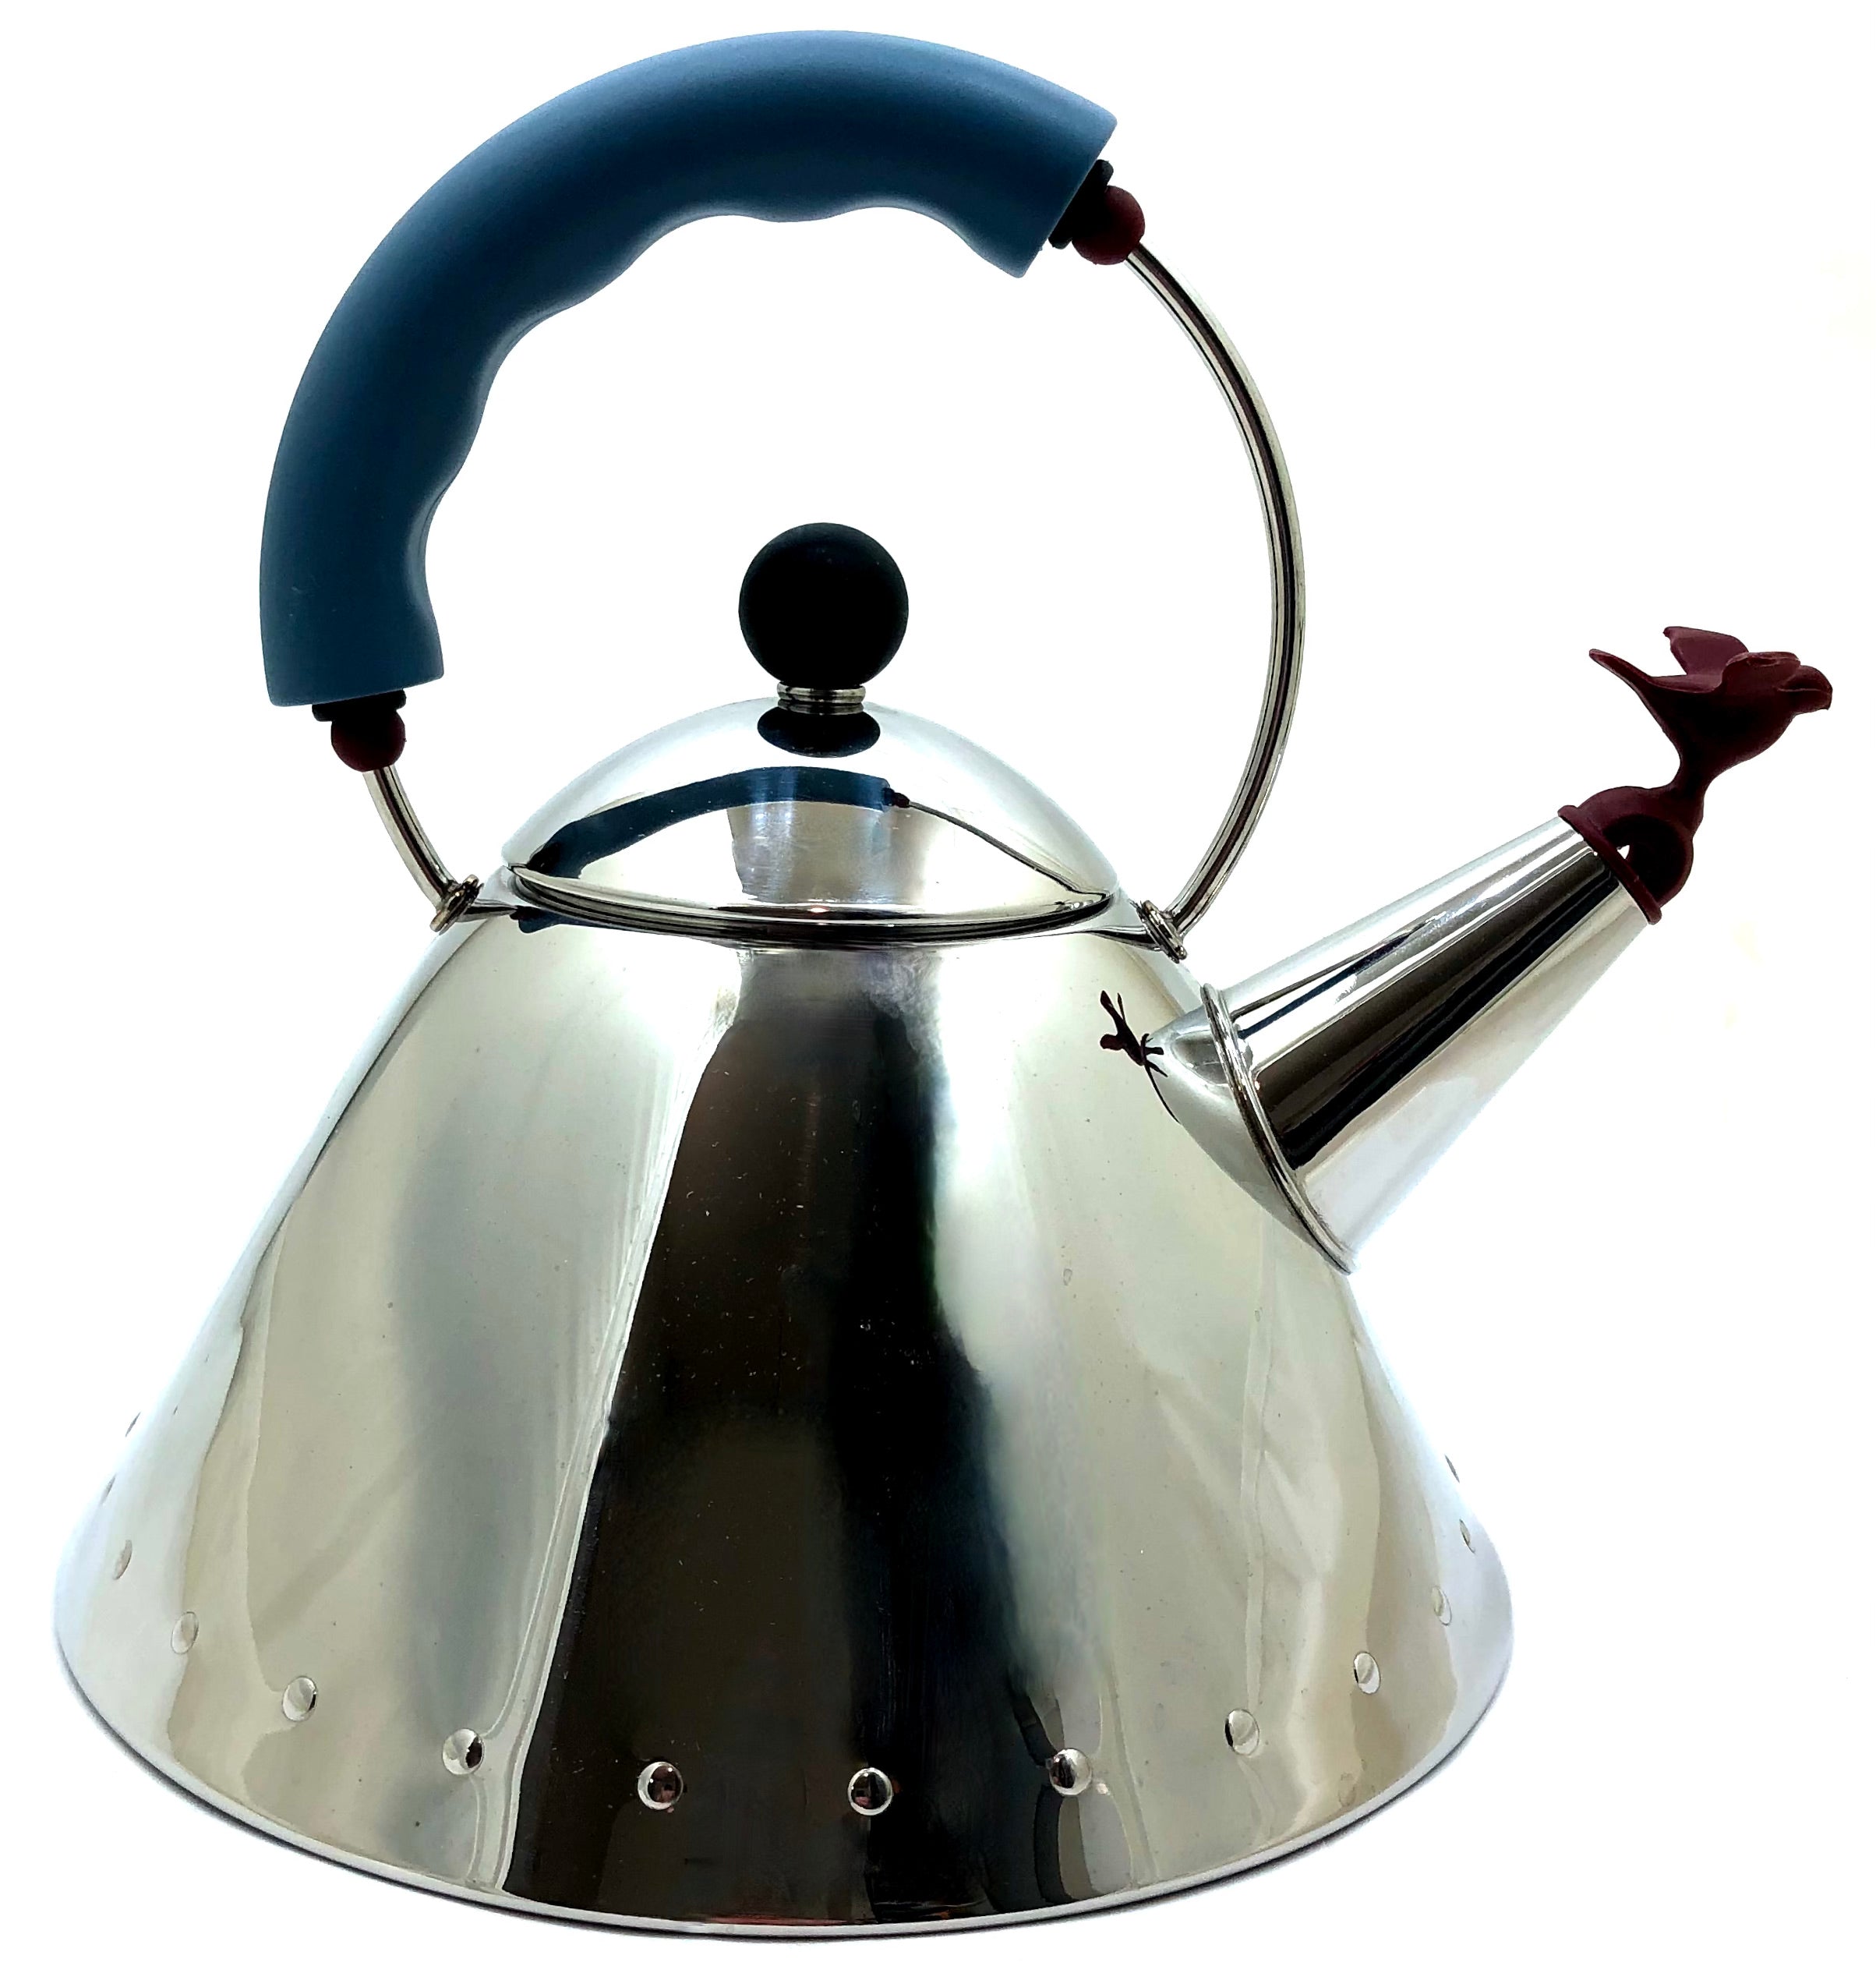 Collectible Autographed and Dated “Whistling Bird” Teakettle by Michael Graves (1934 - 2015) | Mid Century Artifact